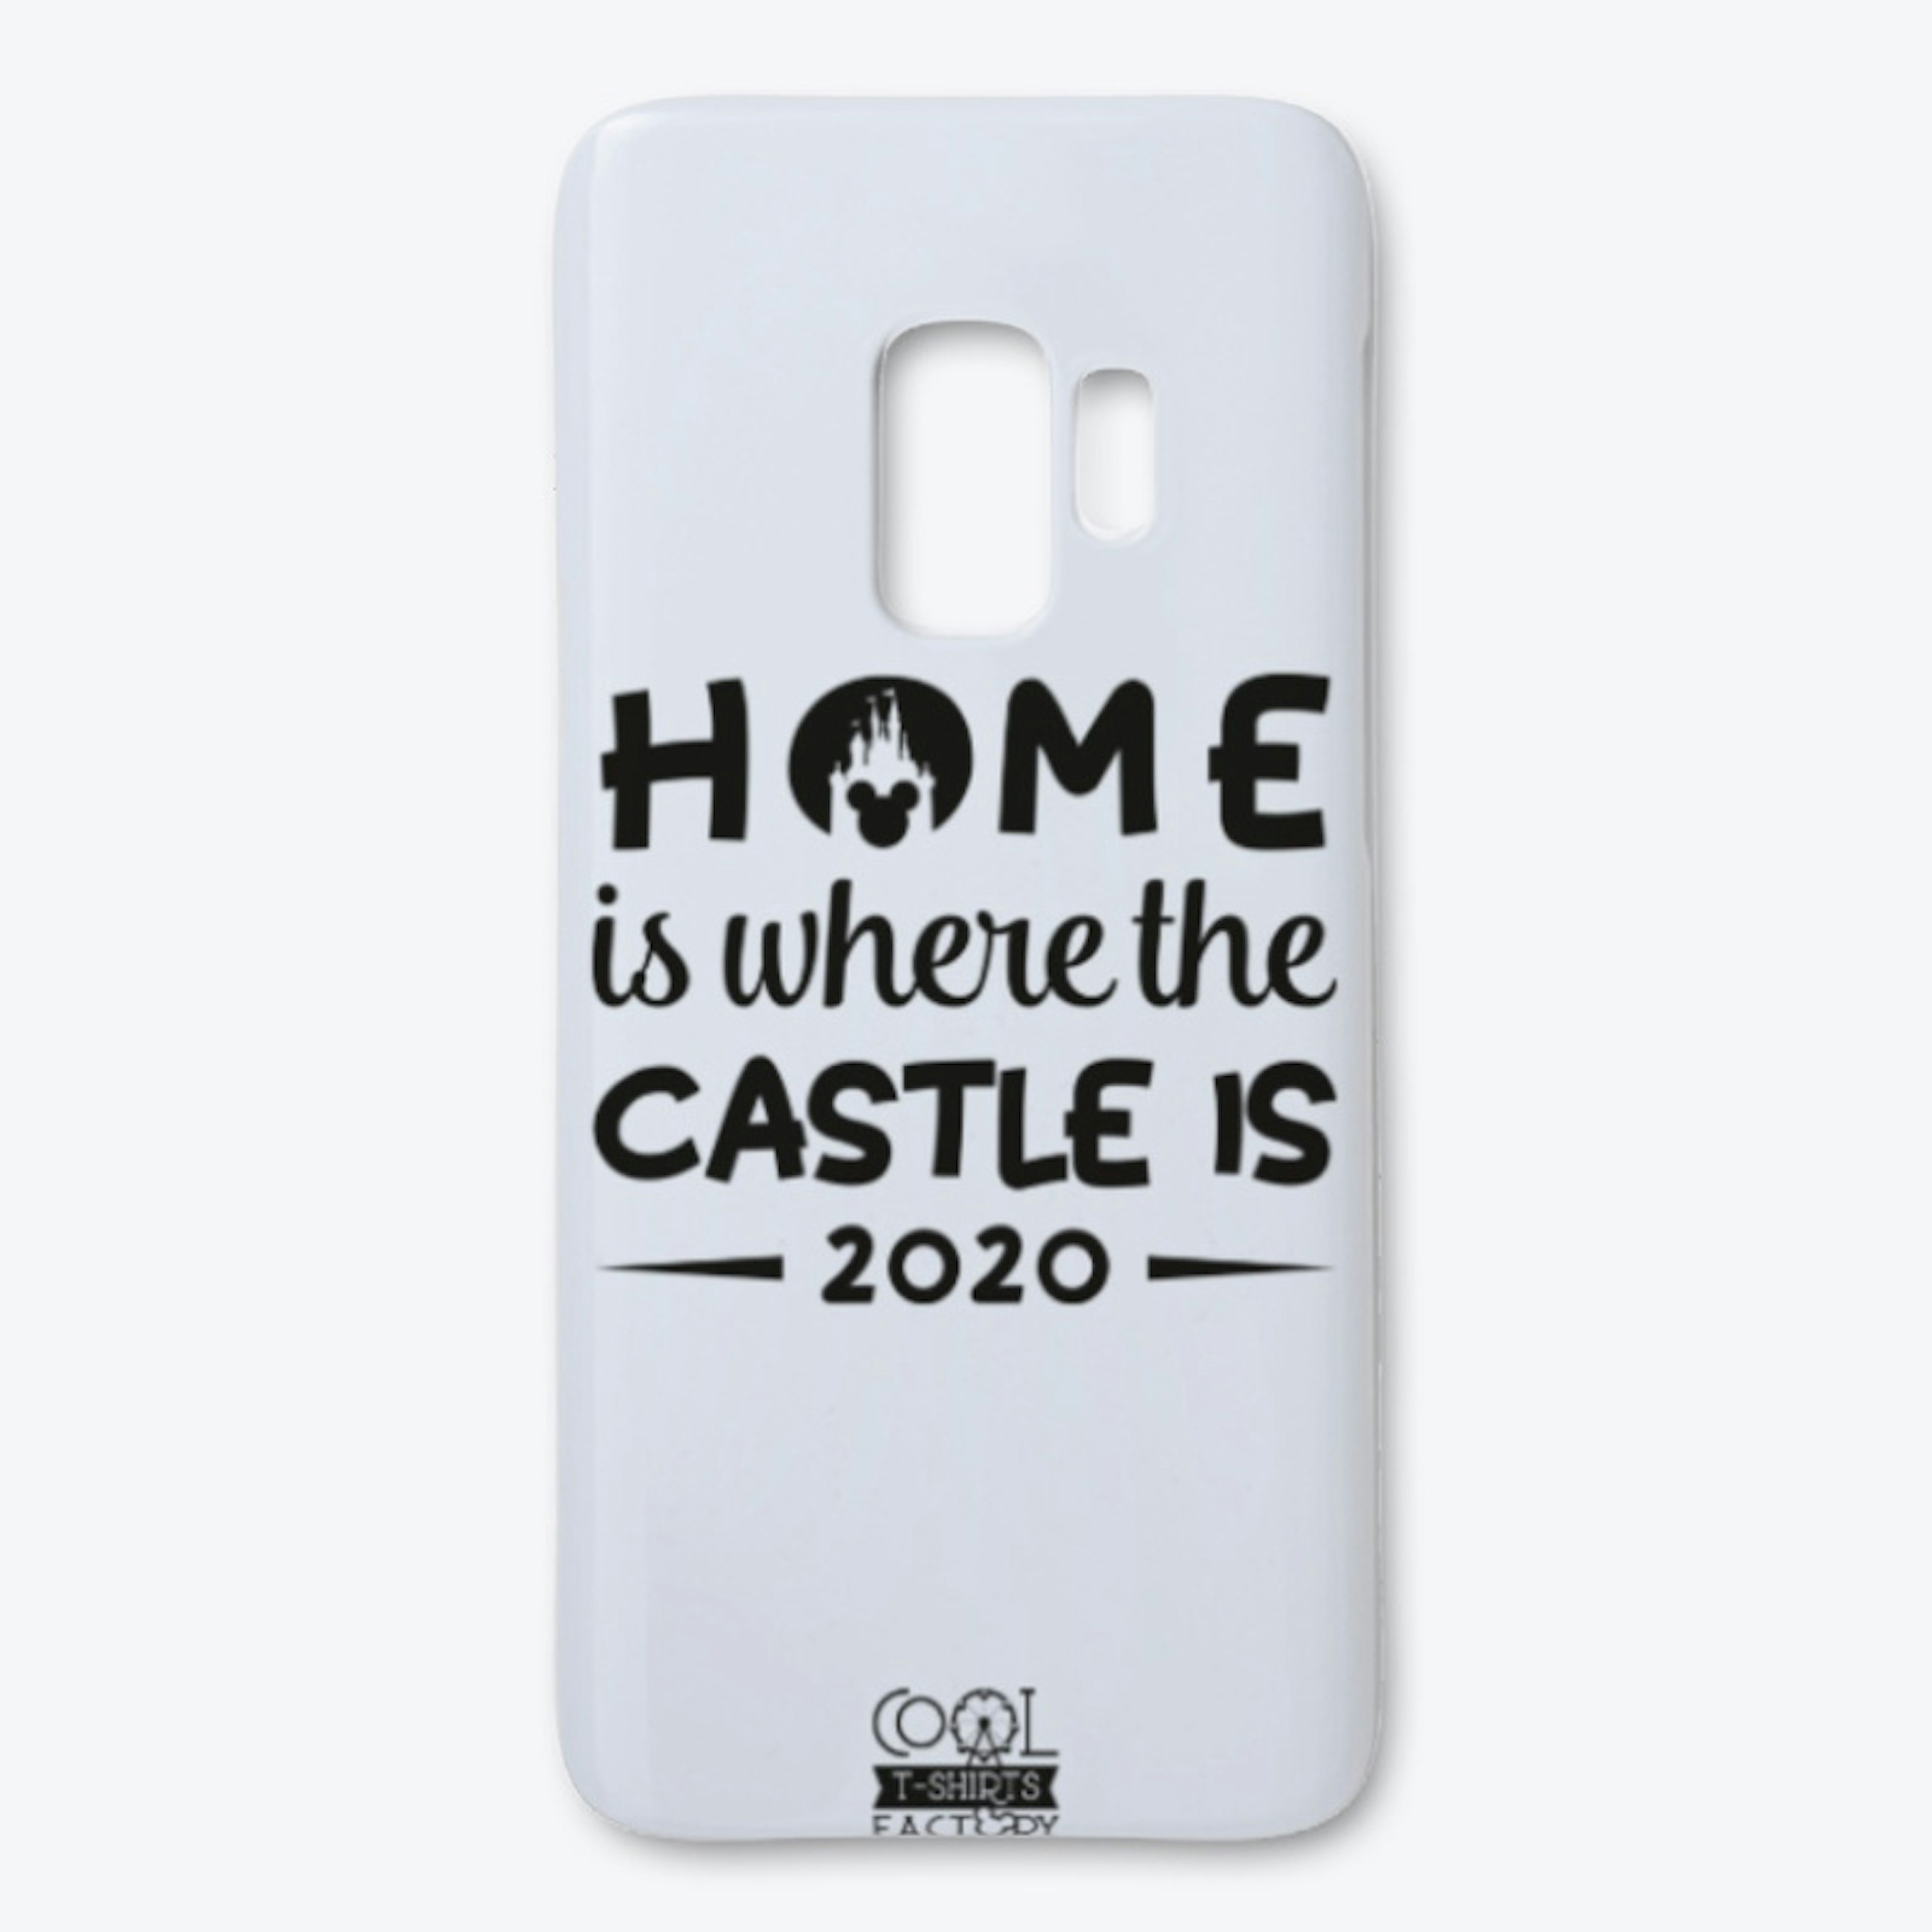 Home is where the Castle is!